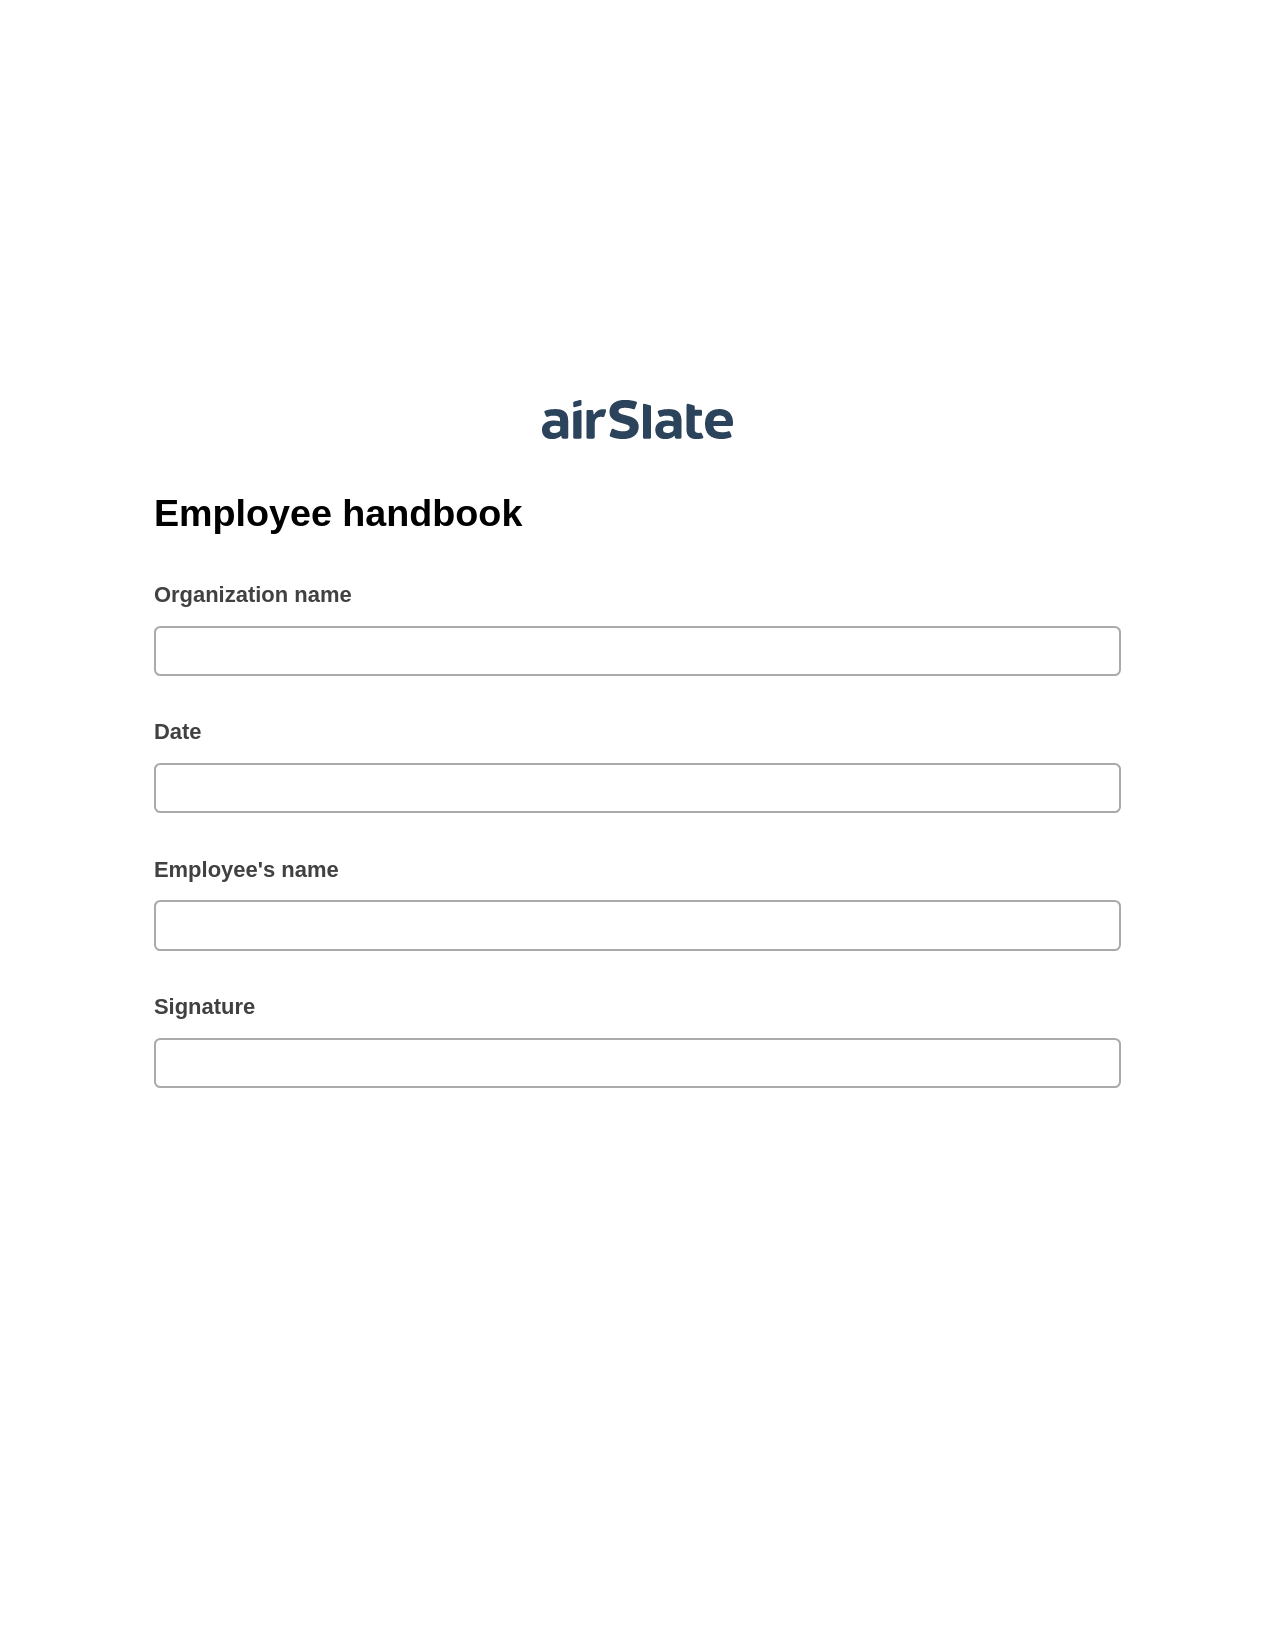 Multirole Employee handbook Pre-fill from Salesforce Record Bot, Create NetSuite Records Bot, Export to NetSuite Record Bot